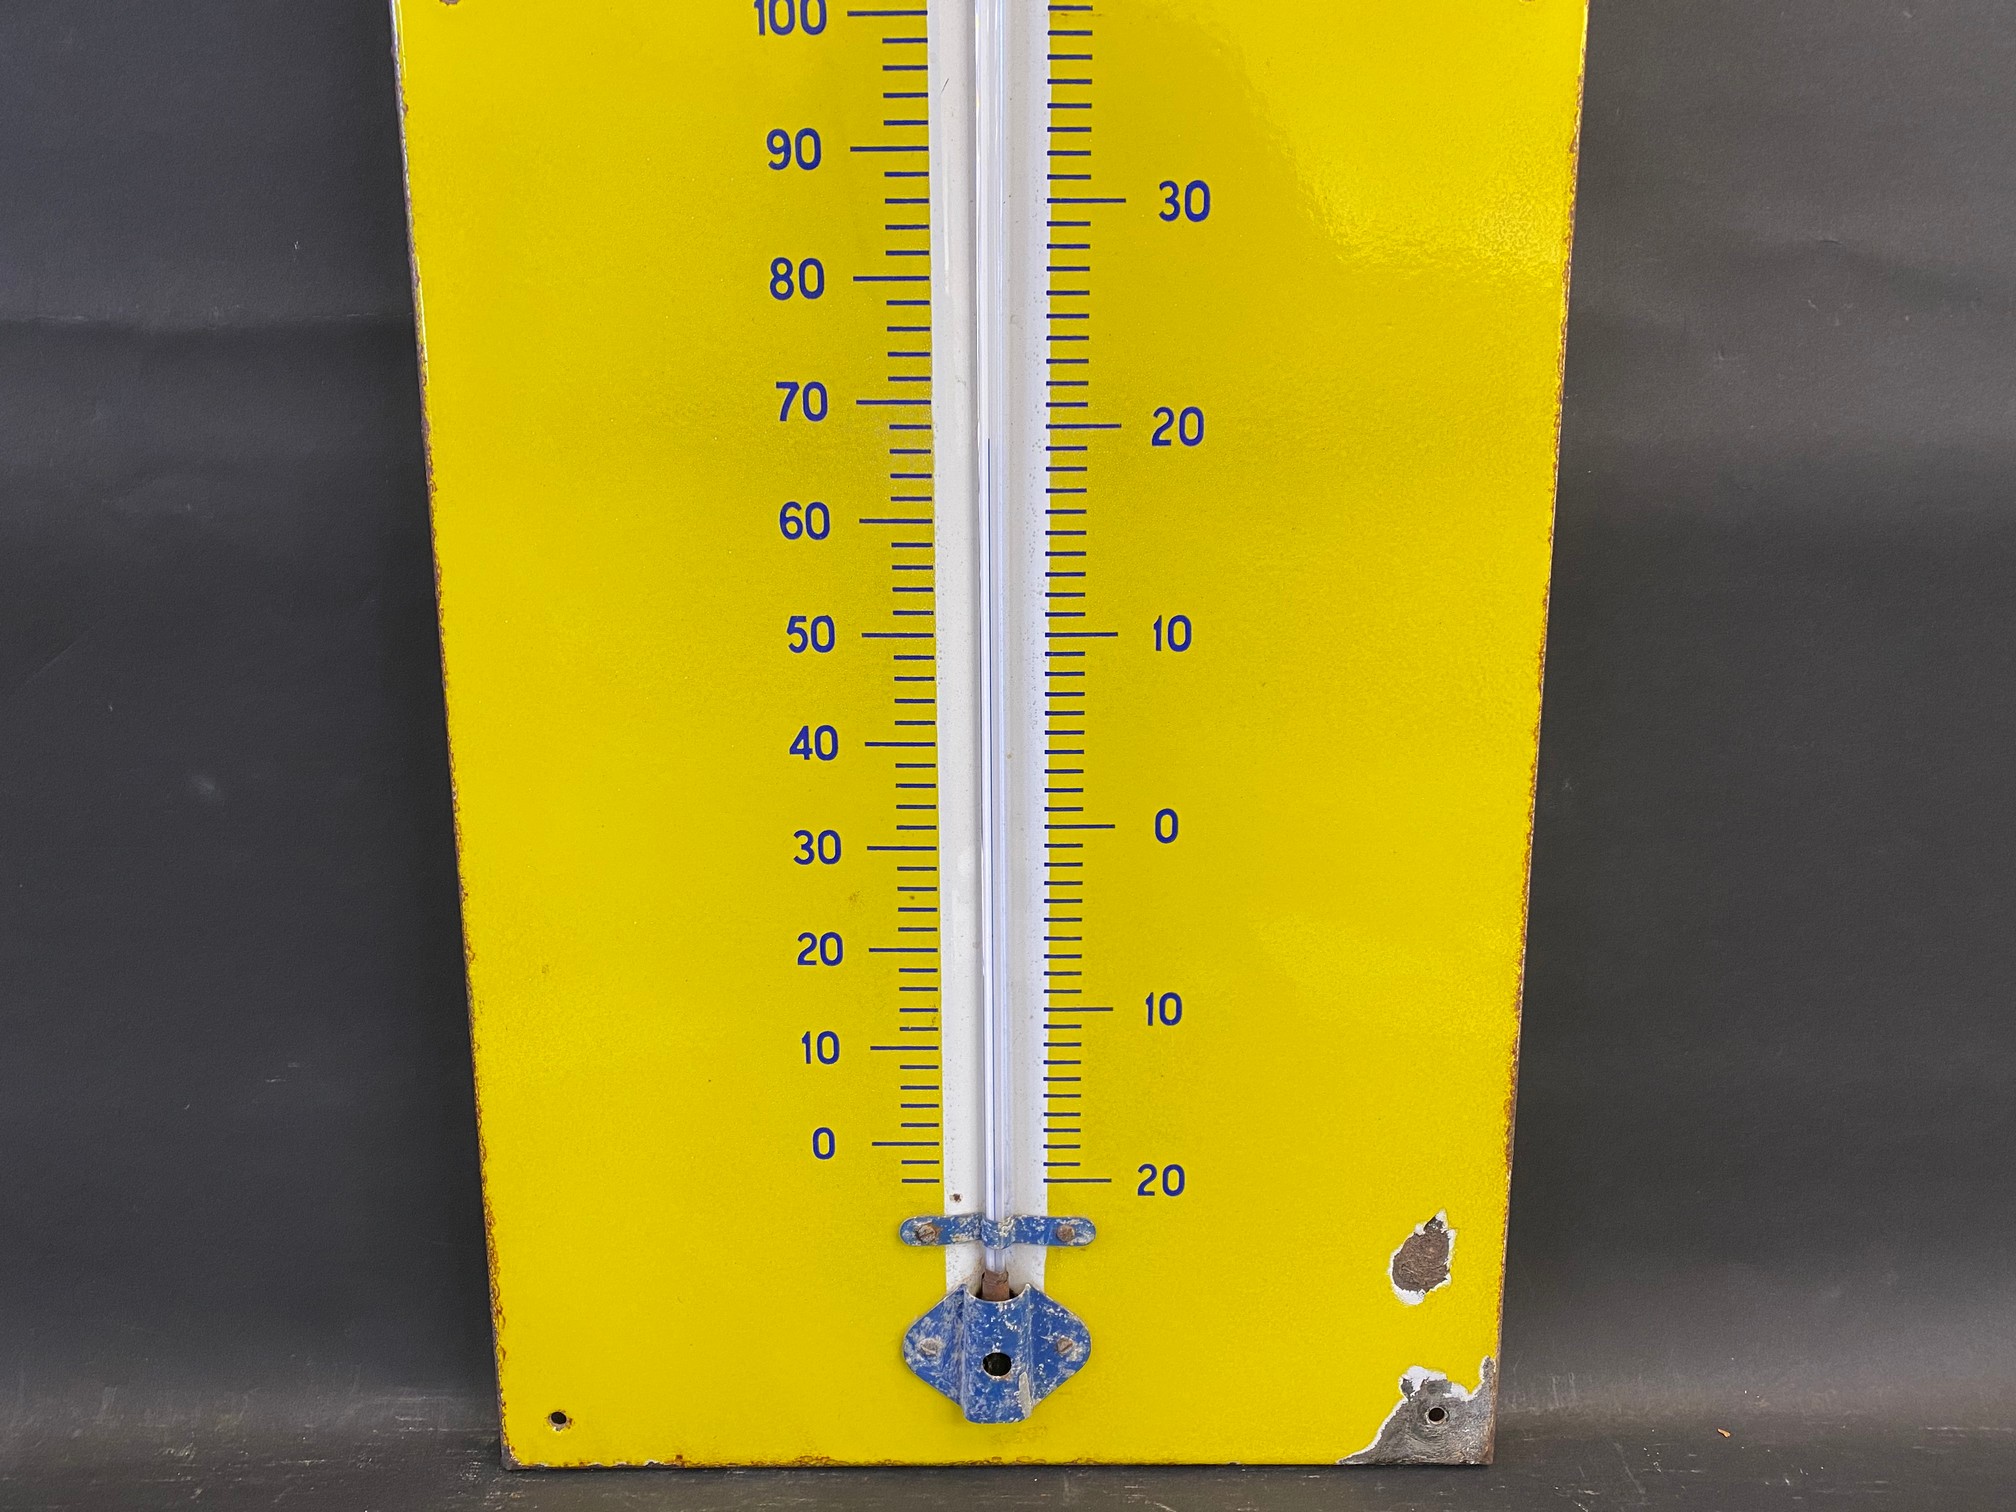 A Duckham's 20-50 Motor Oil enamel thermometer in very good condition, complete with working tube, - Image 4 of 5